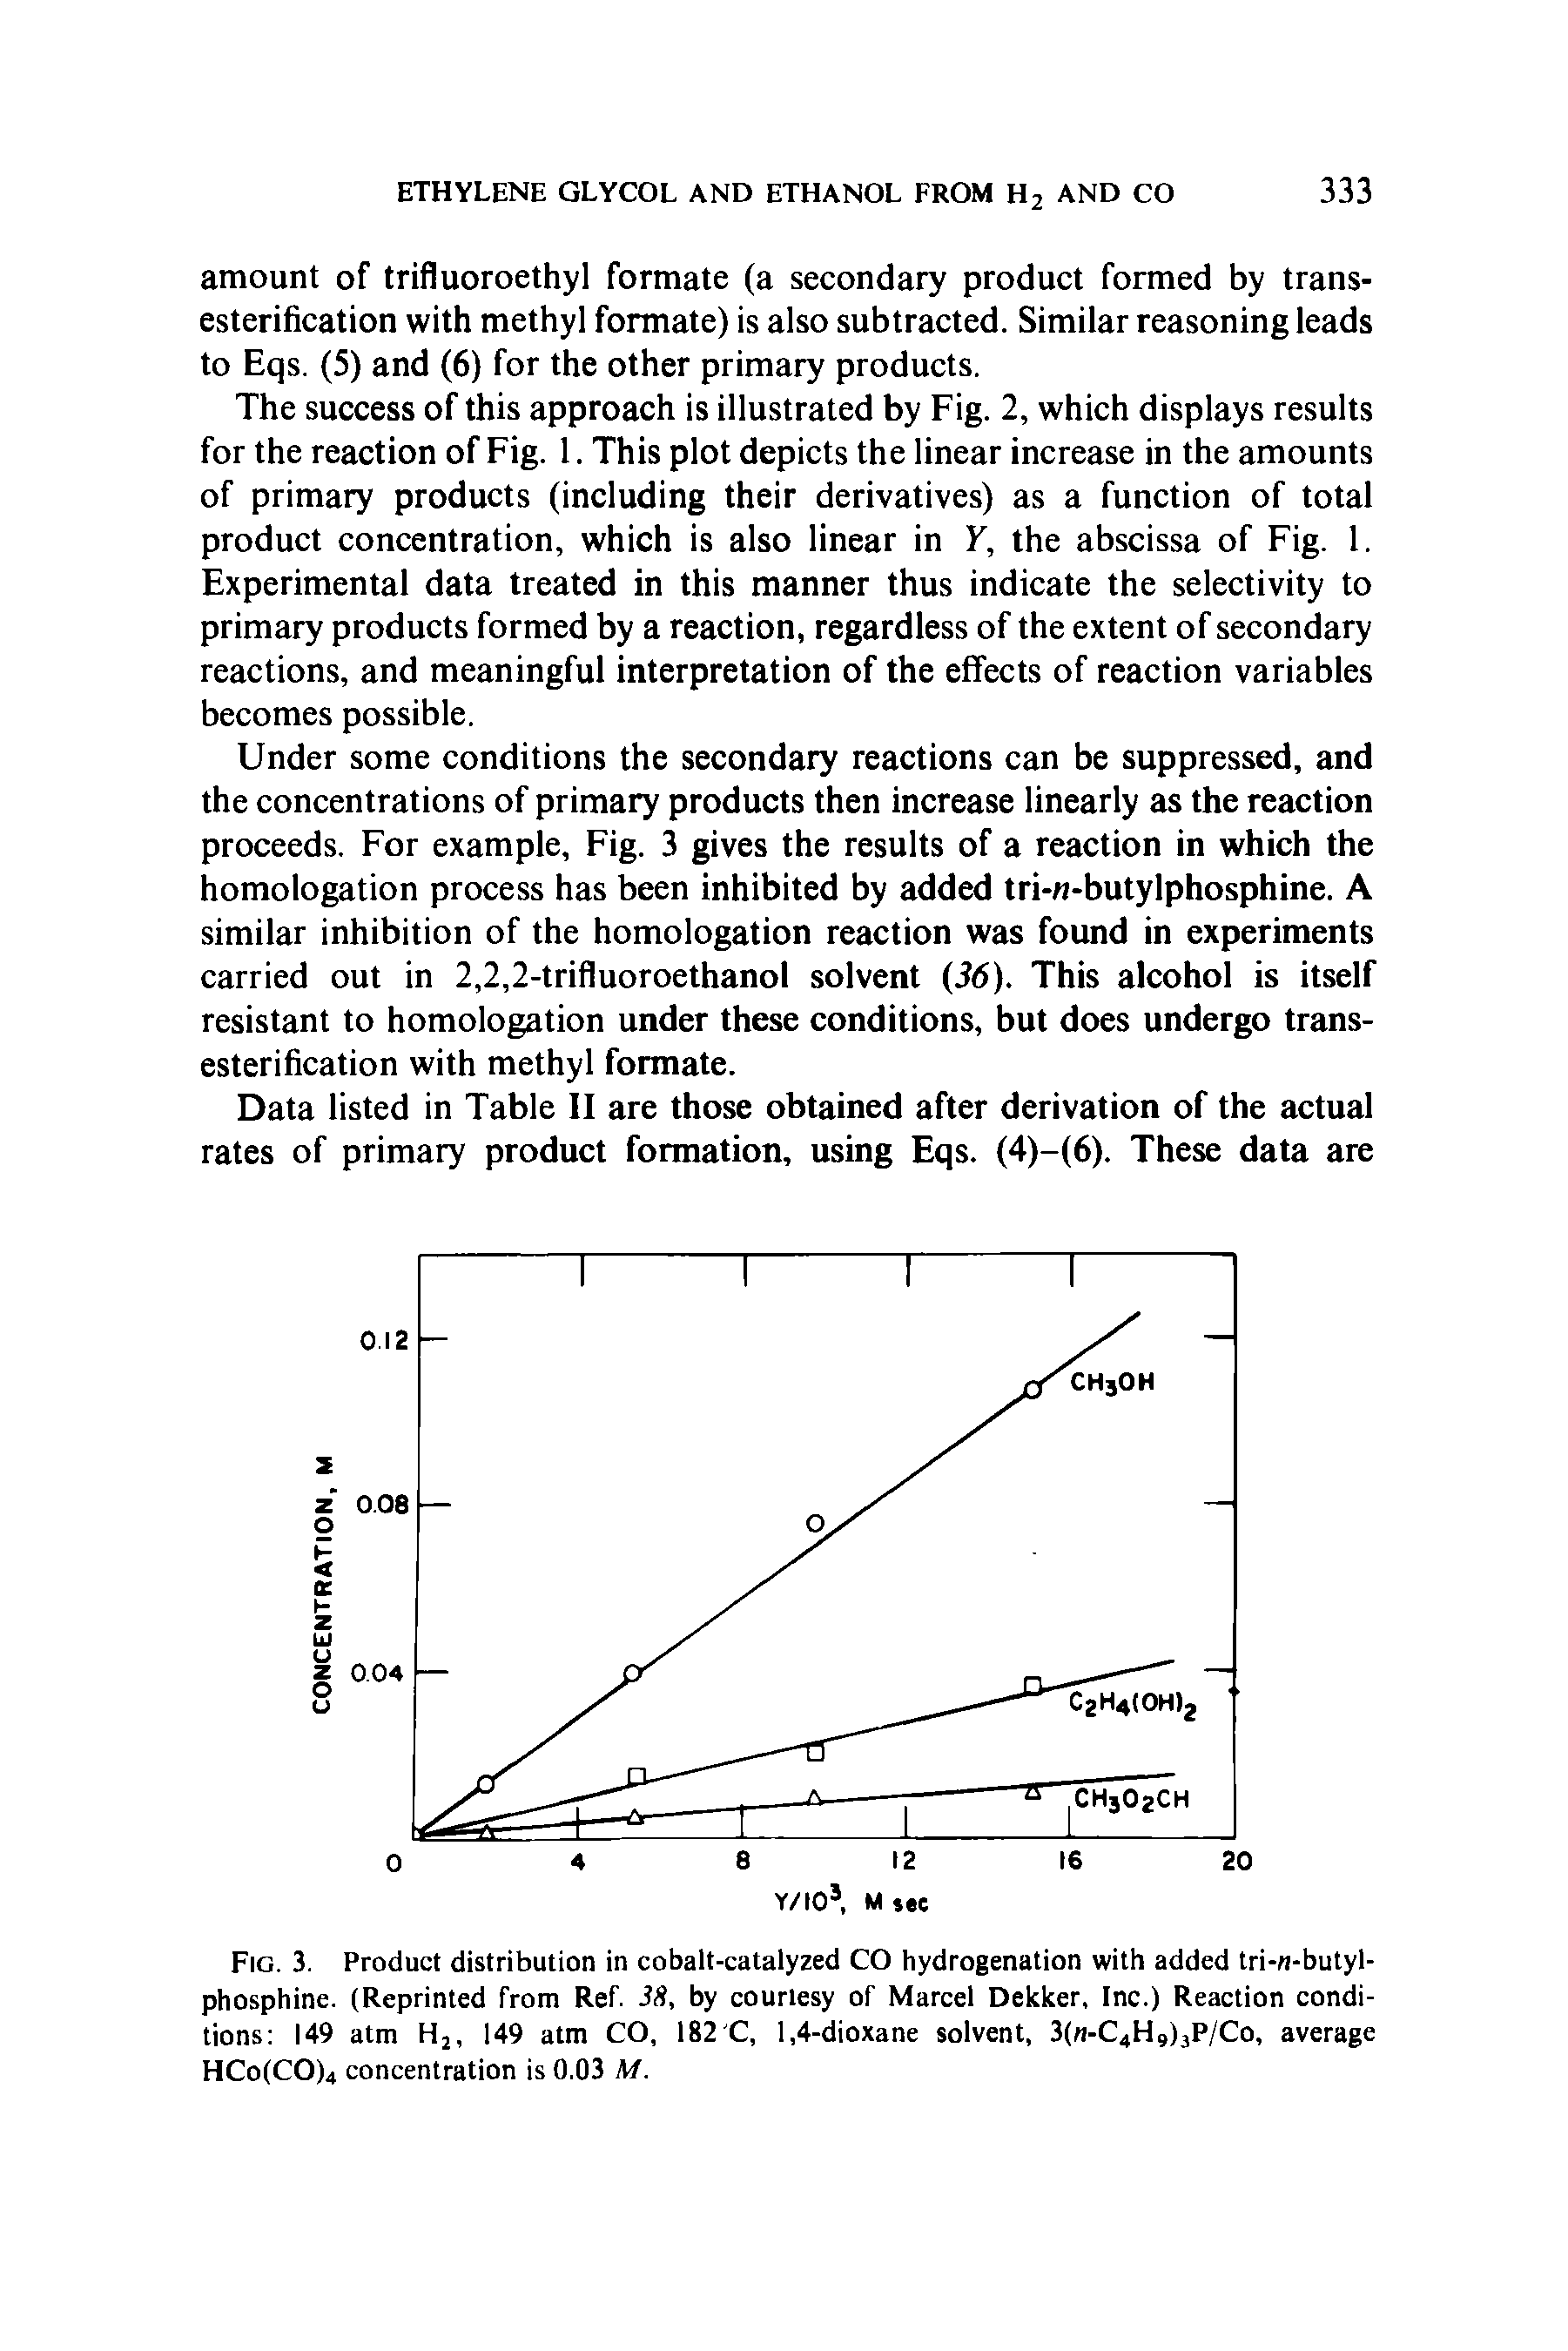 Fig. 3. Product distribution in cobalt-catalyzed CO hydrogenation with added tri-w-butylphosphine. (Reprinted from Ref. 38, by courtesy of Marcel Dekker, Inc.) Reaction conditions 149 atm H2, 149 atm CO, 182 C, 1,4-dioxane solvent, 3(n-C4H9)3P/Co, average HCo(CO)4 concentration is 0.03 M.